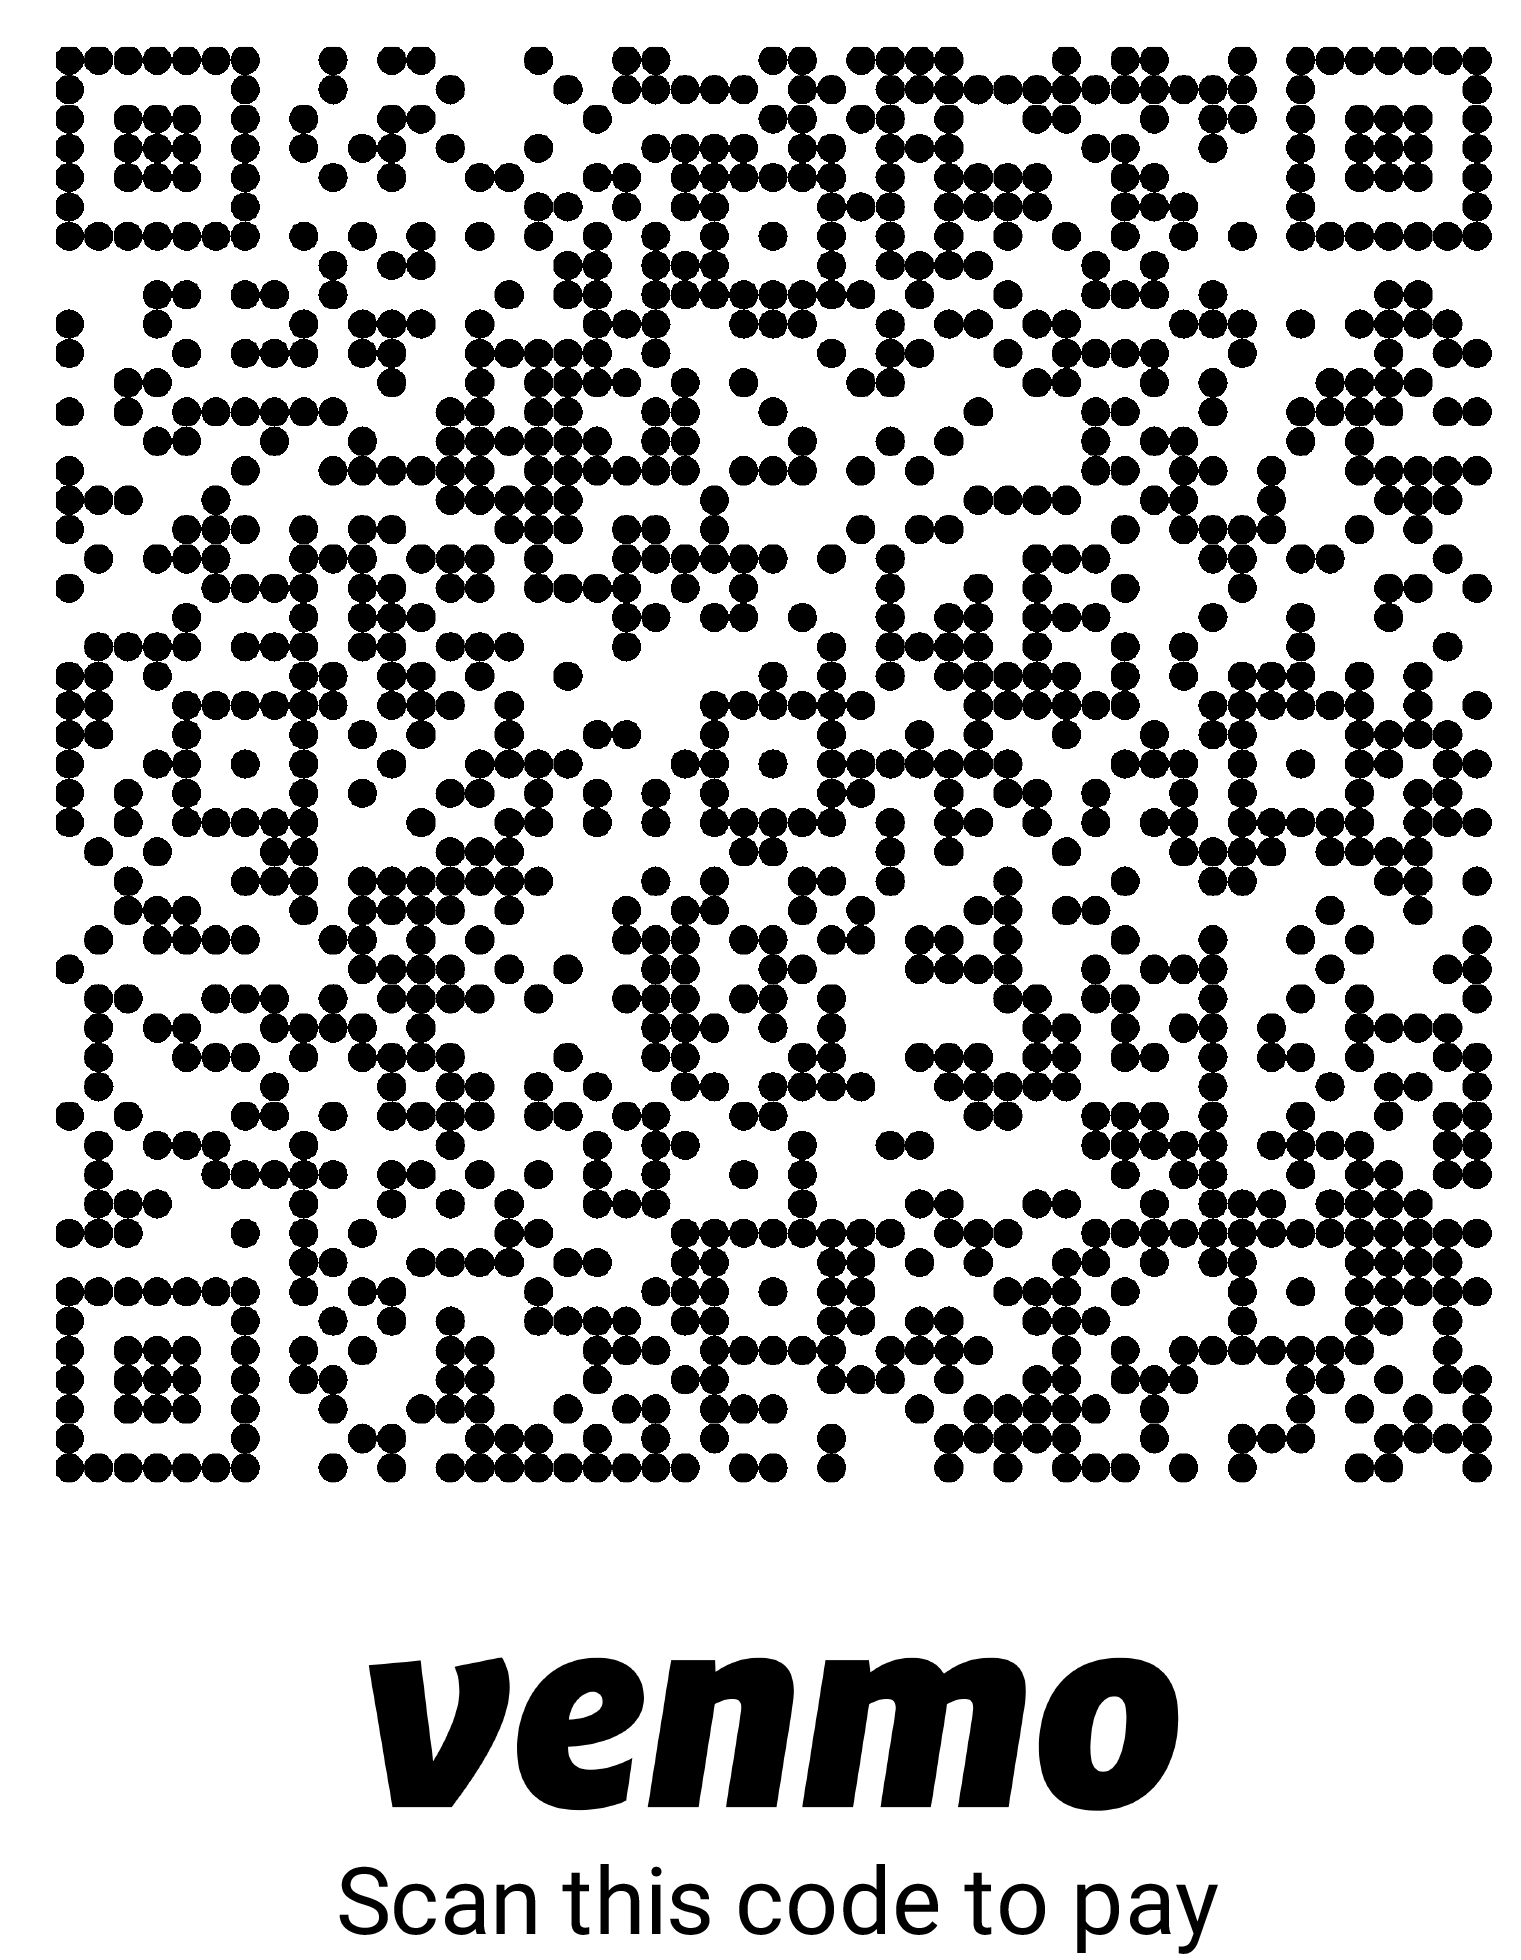 Smith Industries Payment Venmo QR Code